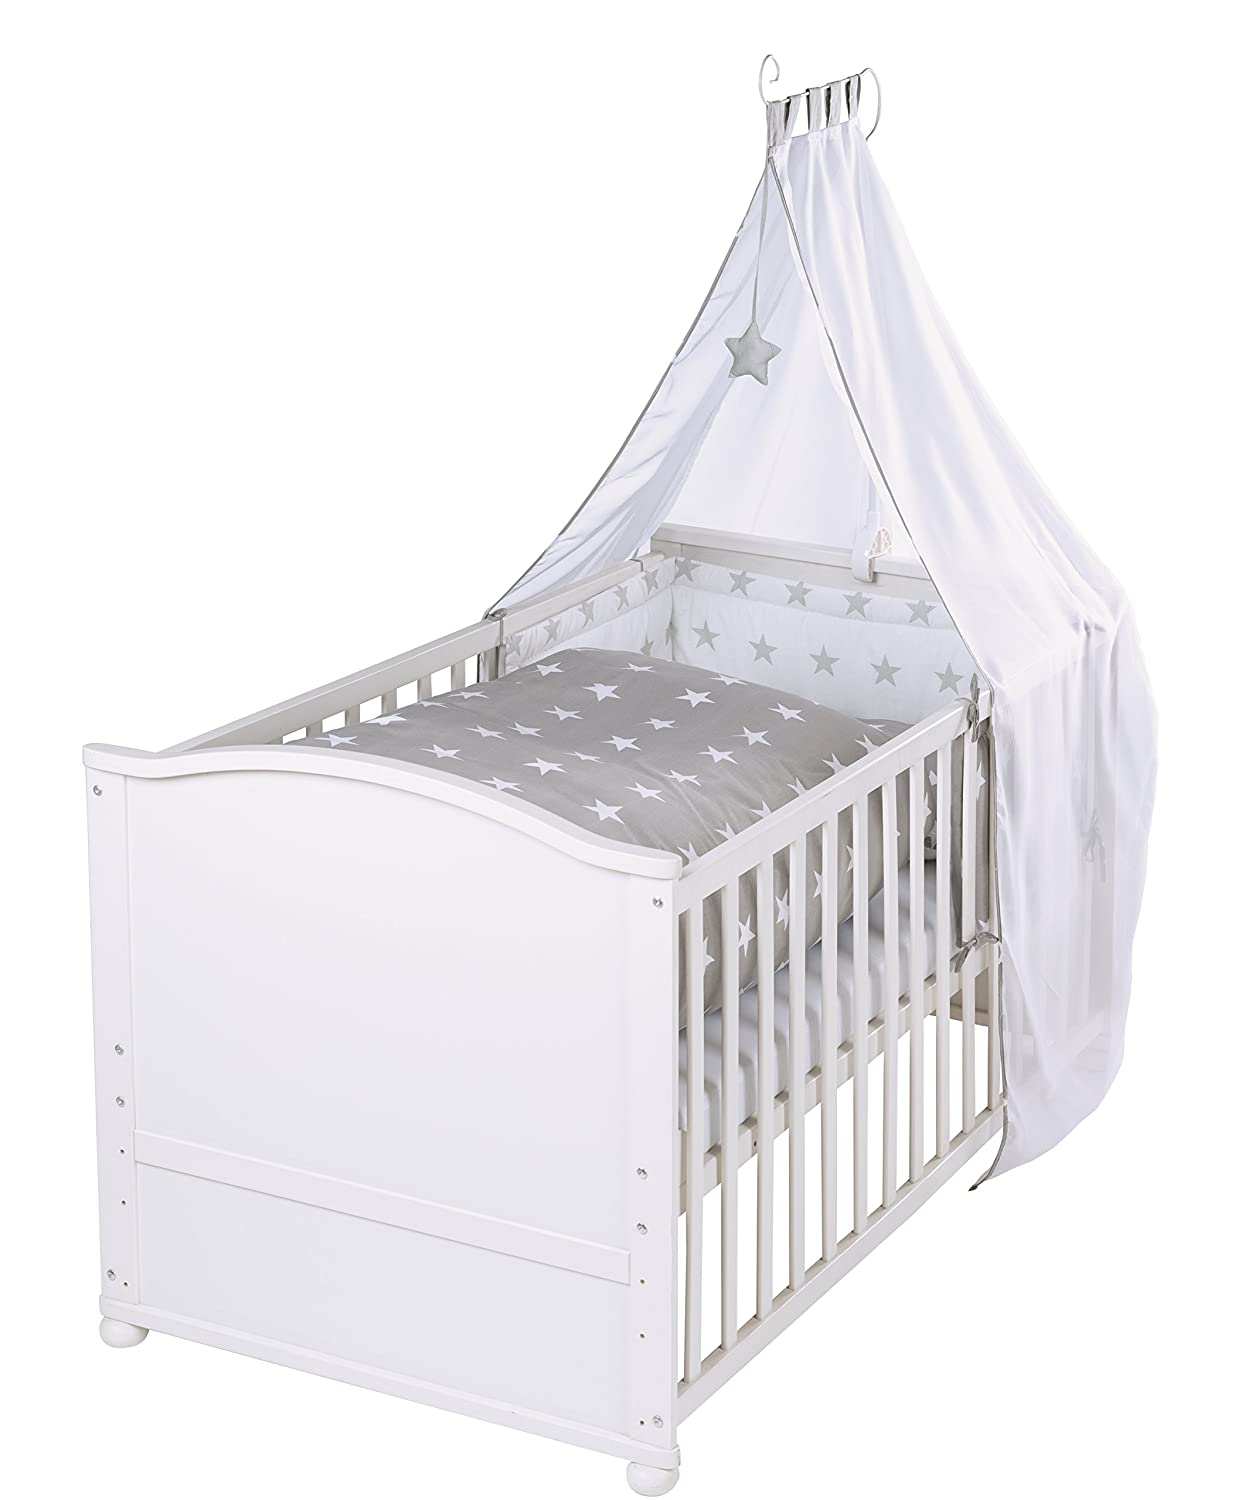 Roba Little Stars Complete Bed Set White with Furnishings, Combi Cot 70 x 140 cm incl. Bed linen, canopy, nest, mattress. Adam and Owl White